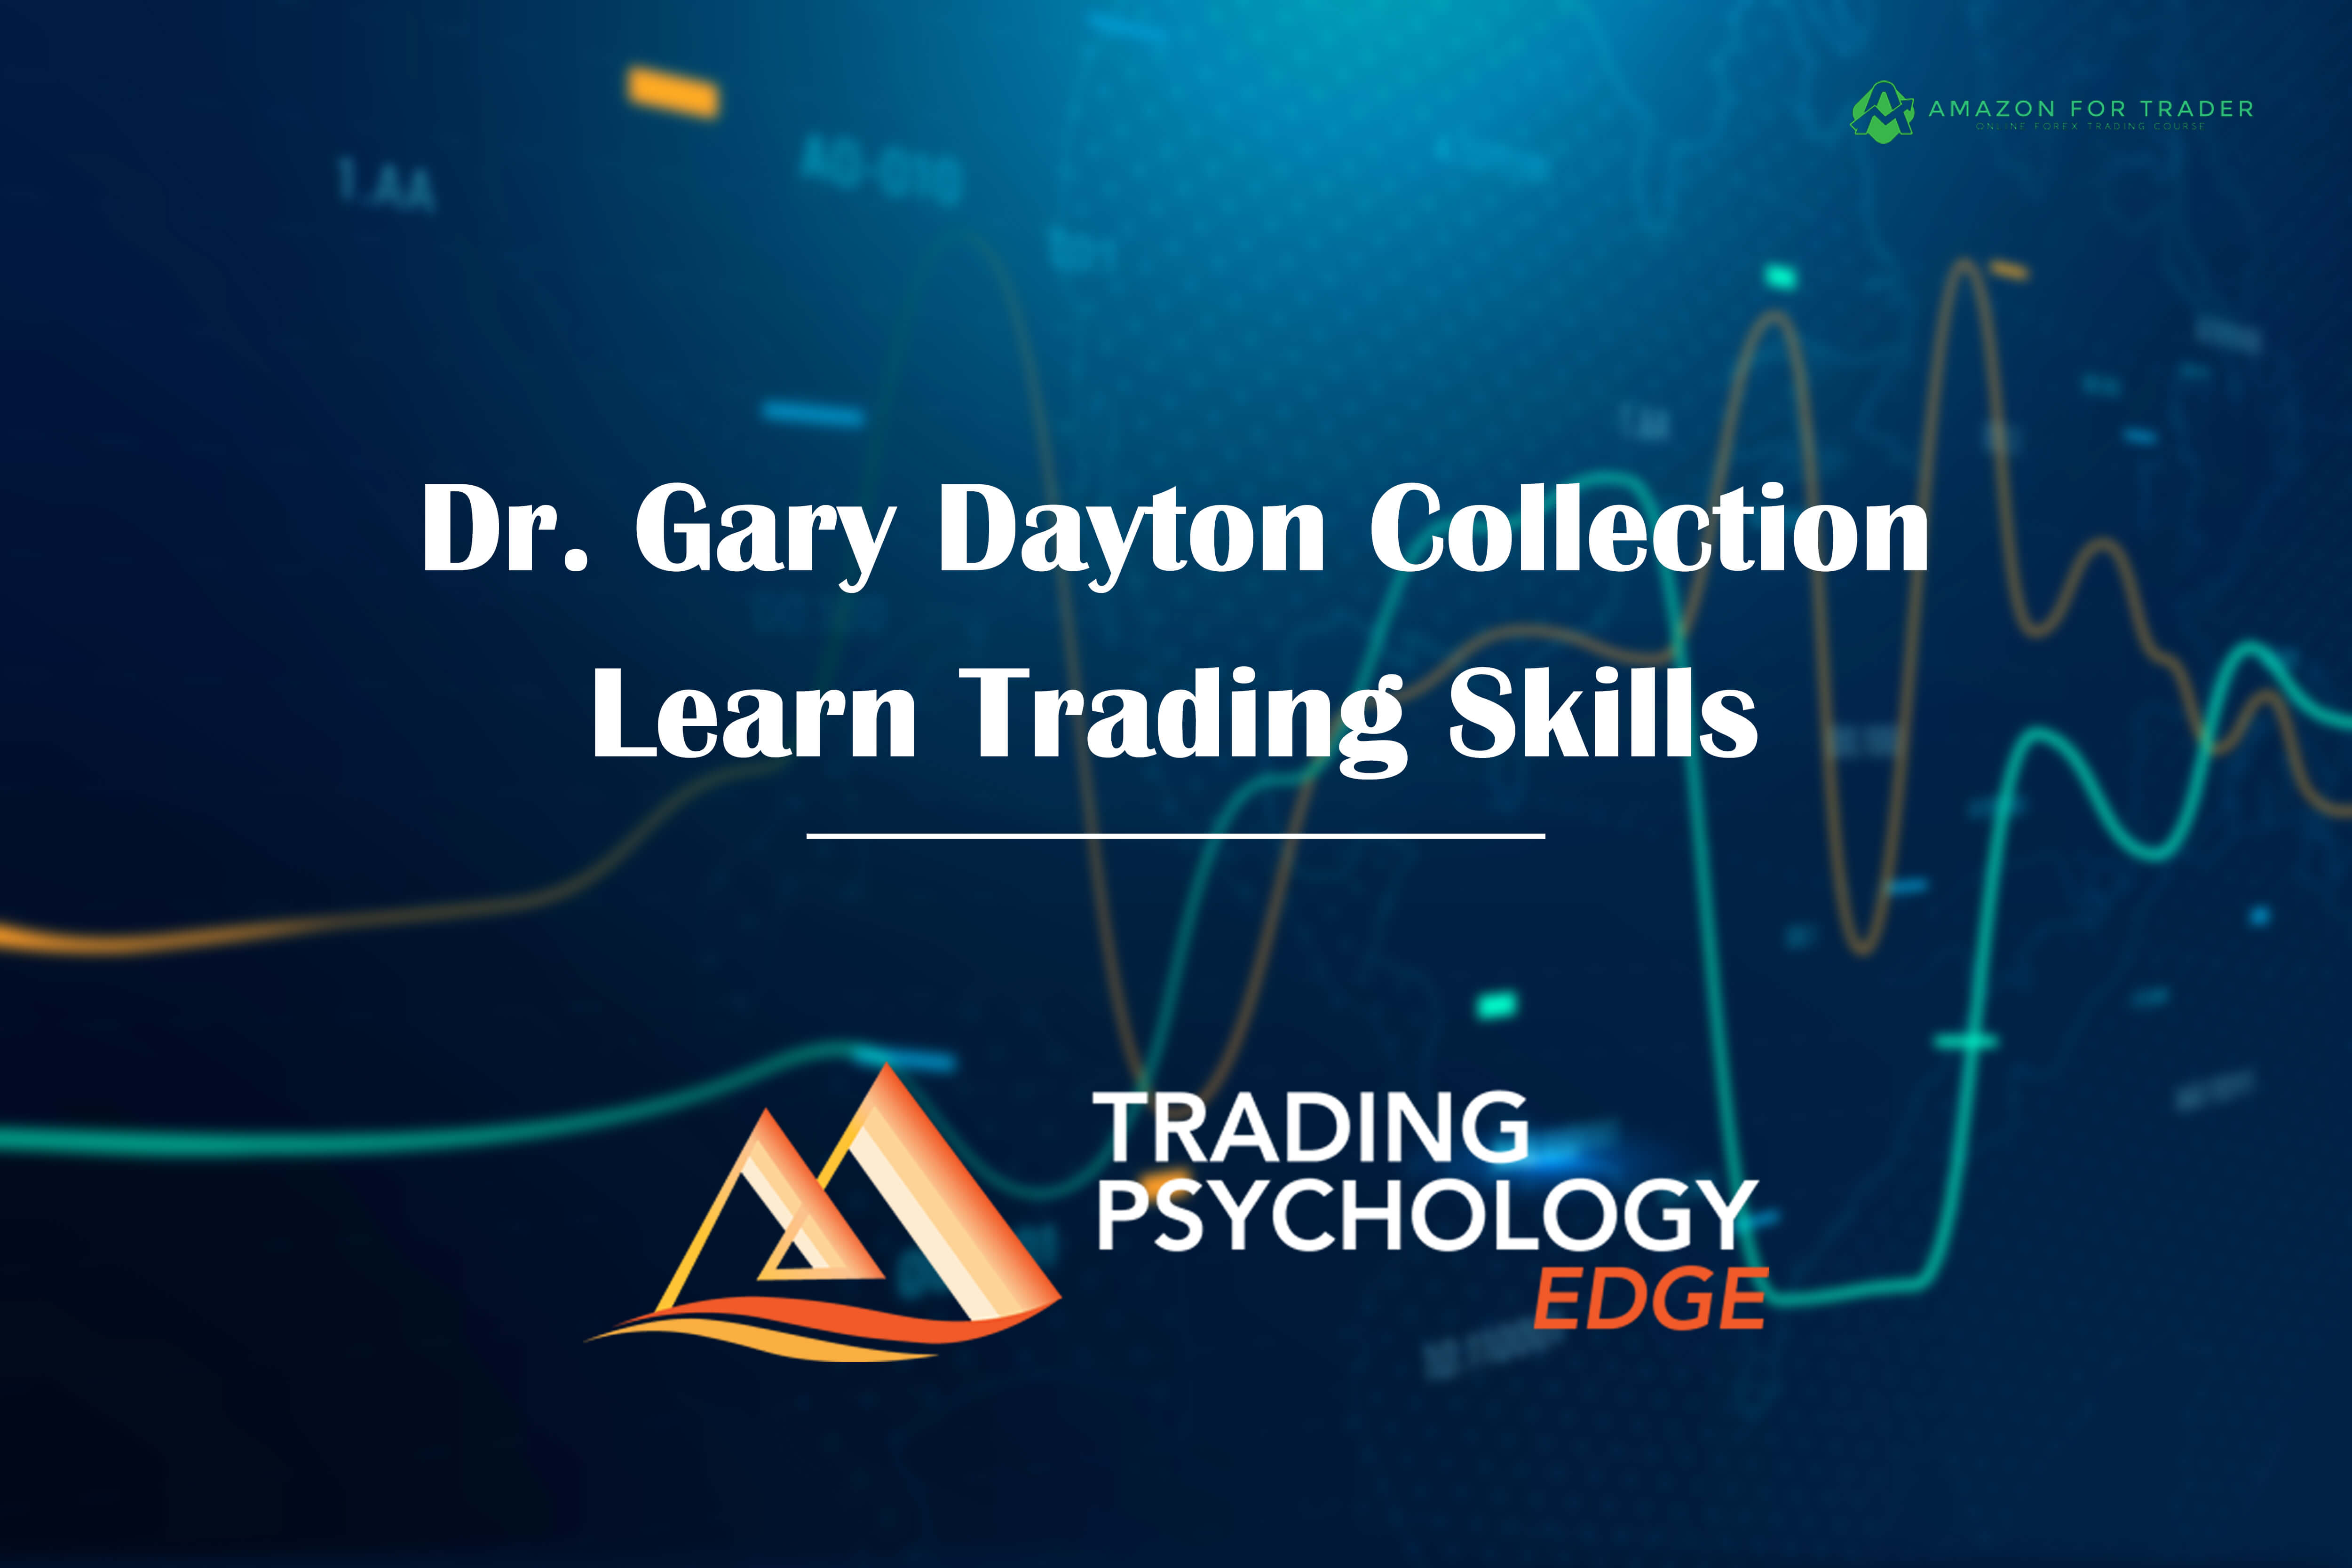 Dr. Gary Dayton Collection - Learn Trading Skills